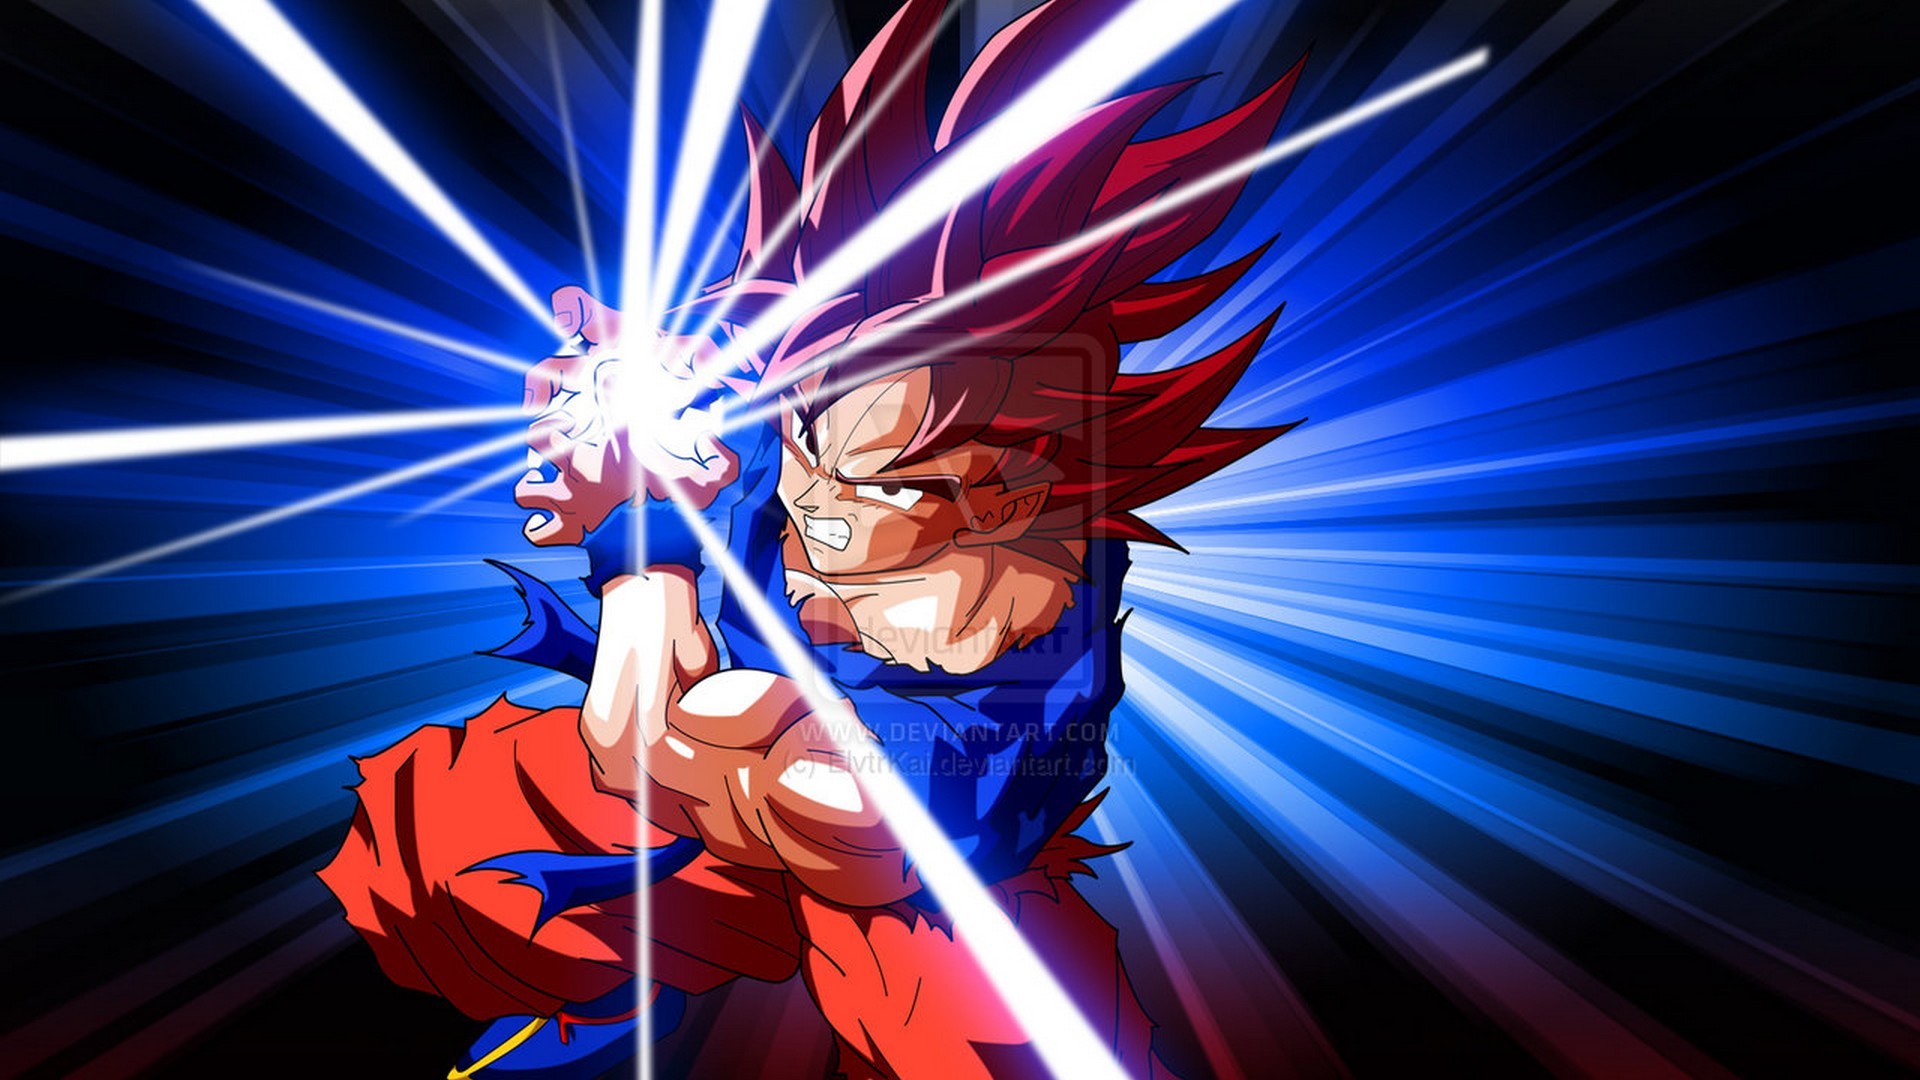 Wallpaper Goku Super Saiyan God Desktop with resolution 1920X1080 pixel. You can use this wallpaper as background for your desktop Computer Screensavers, Android or iPhone smartphones